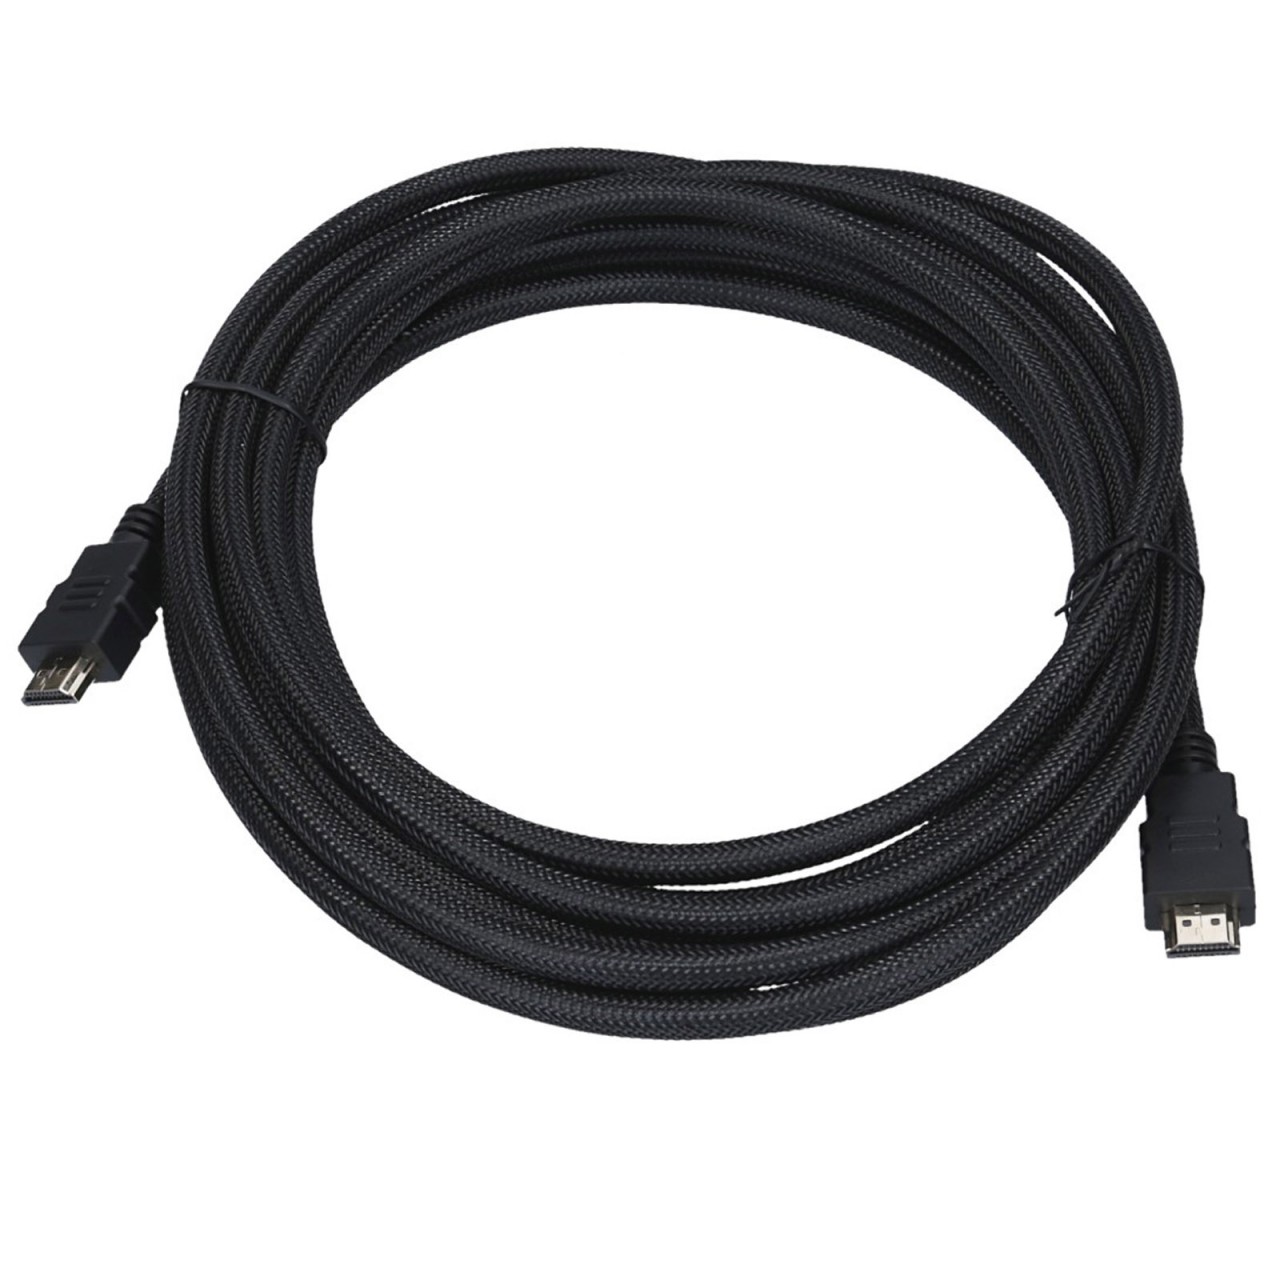 Professional 0.5m HDMI connection cable, ENOVA EC-H1-0.5 - cable technology by Enova Solutions AG